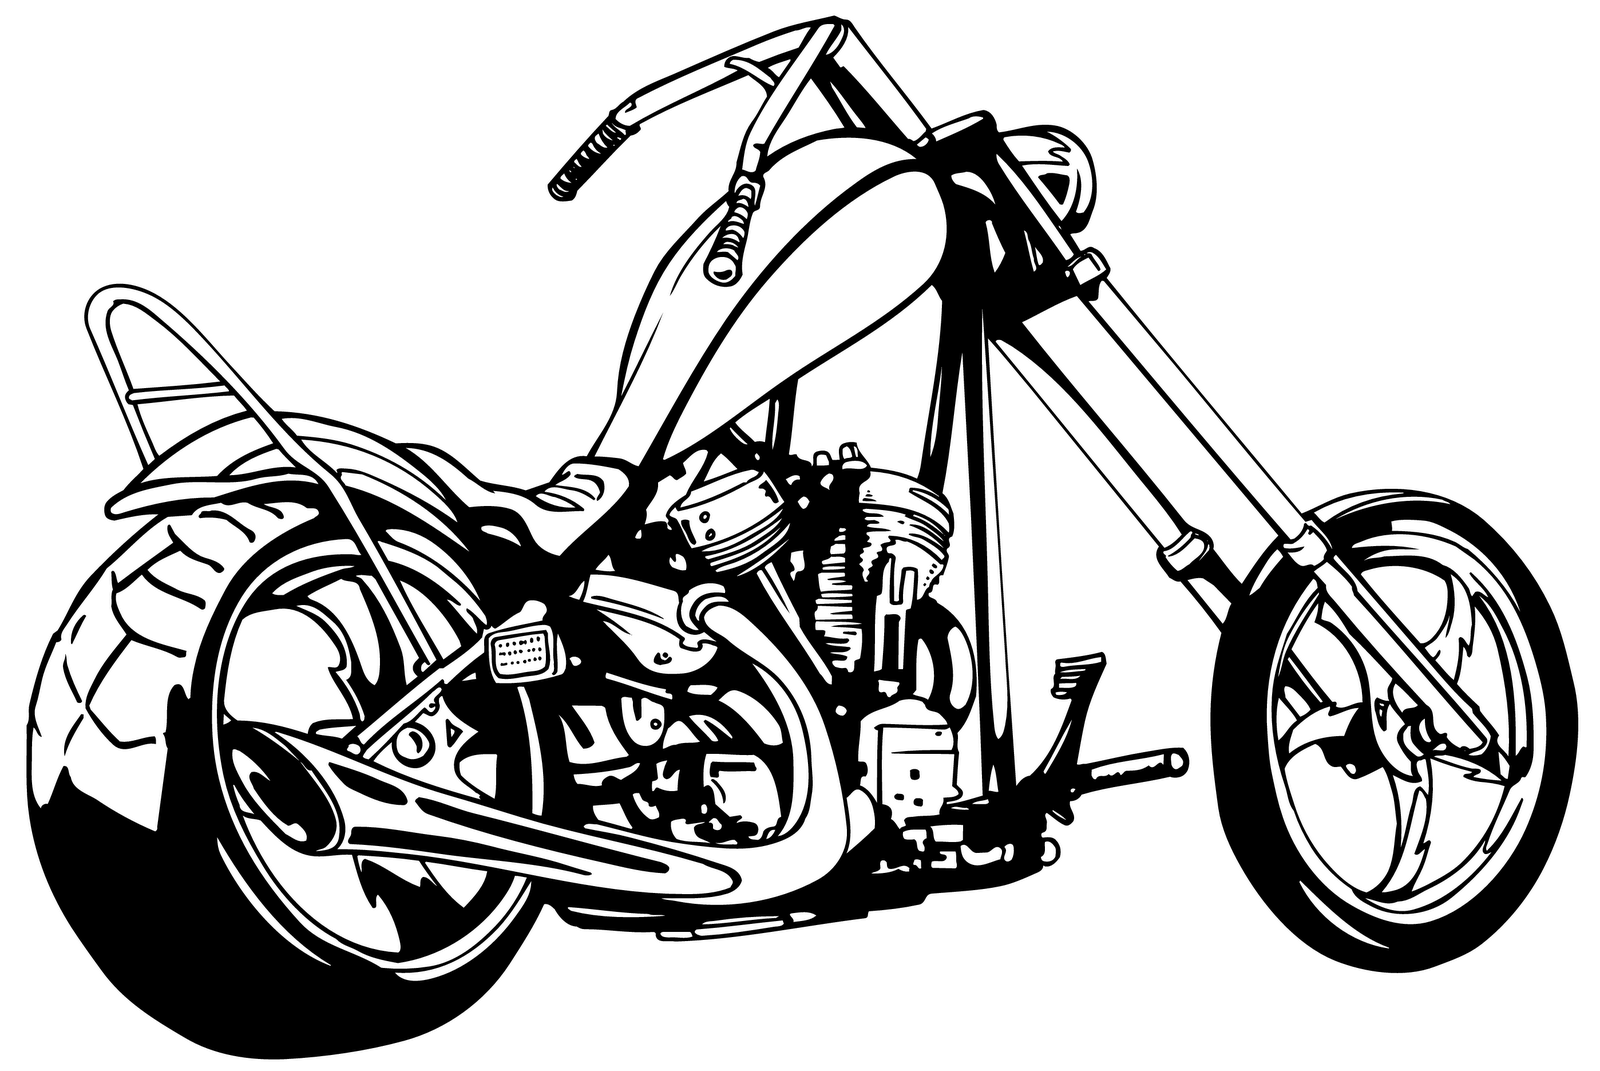 dog on motorcycle clipart - photo #36